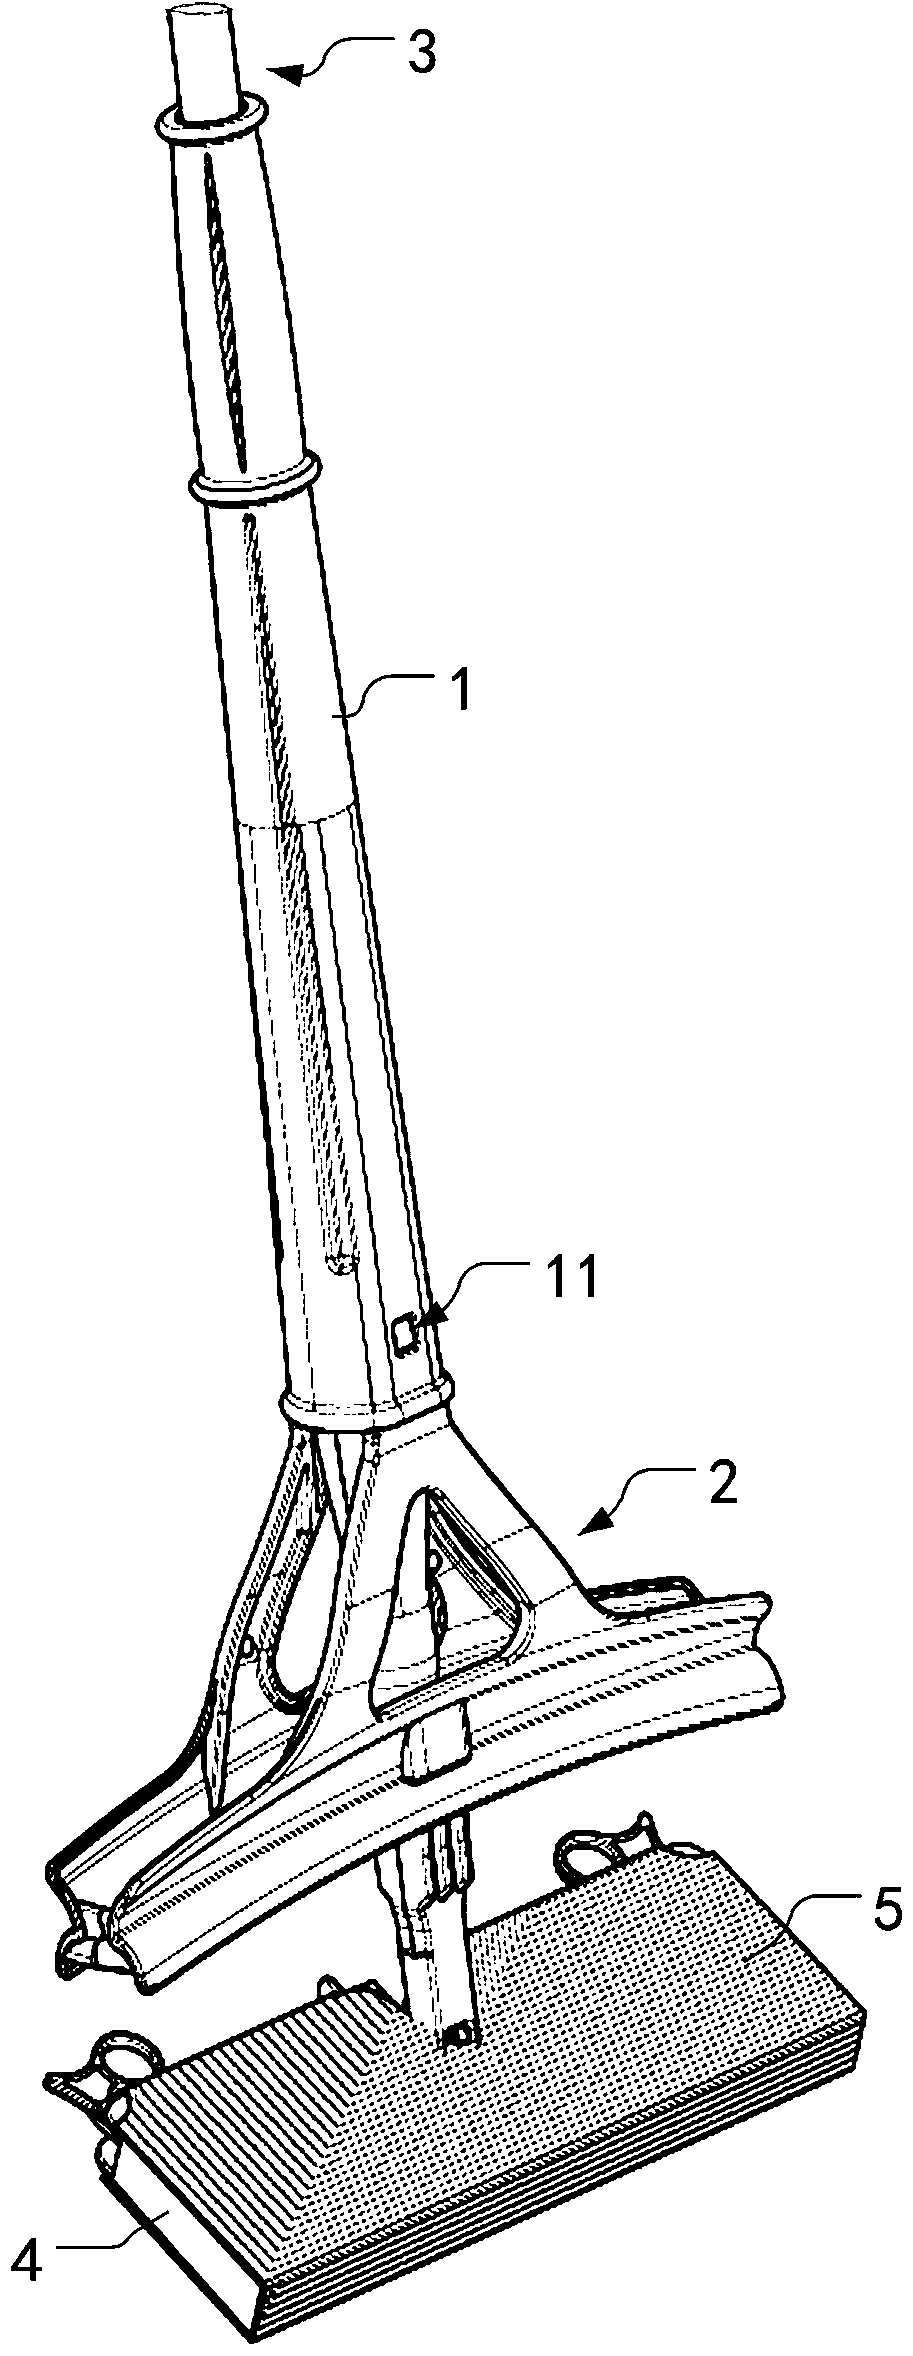 A detachable wring water mop